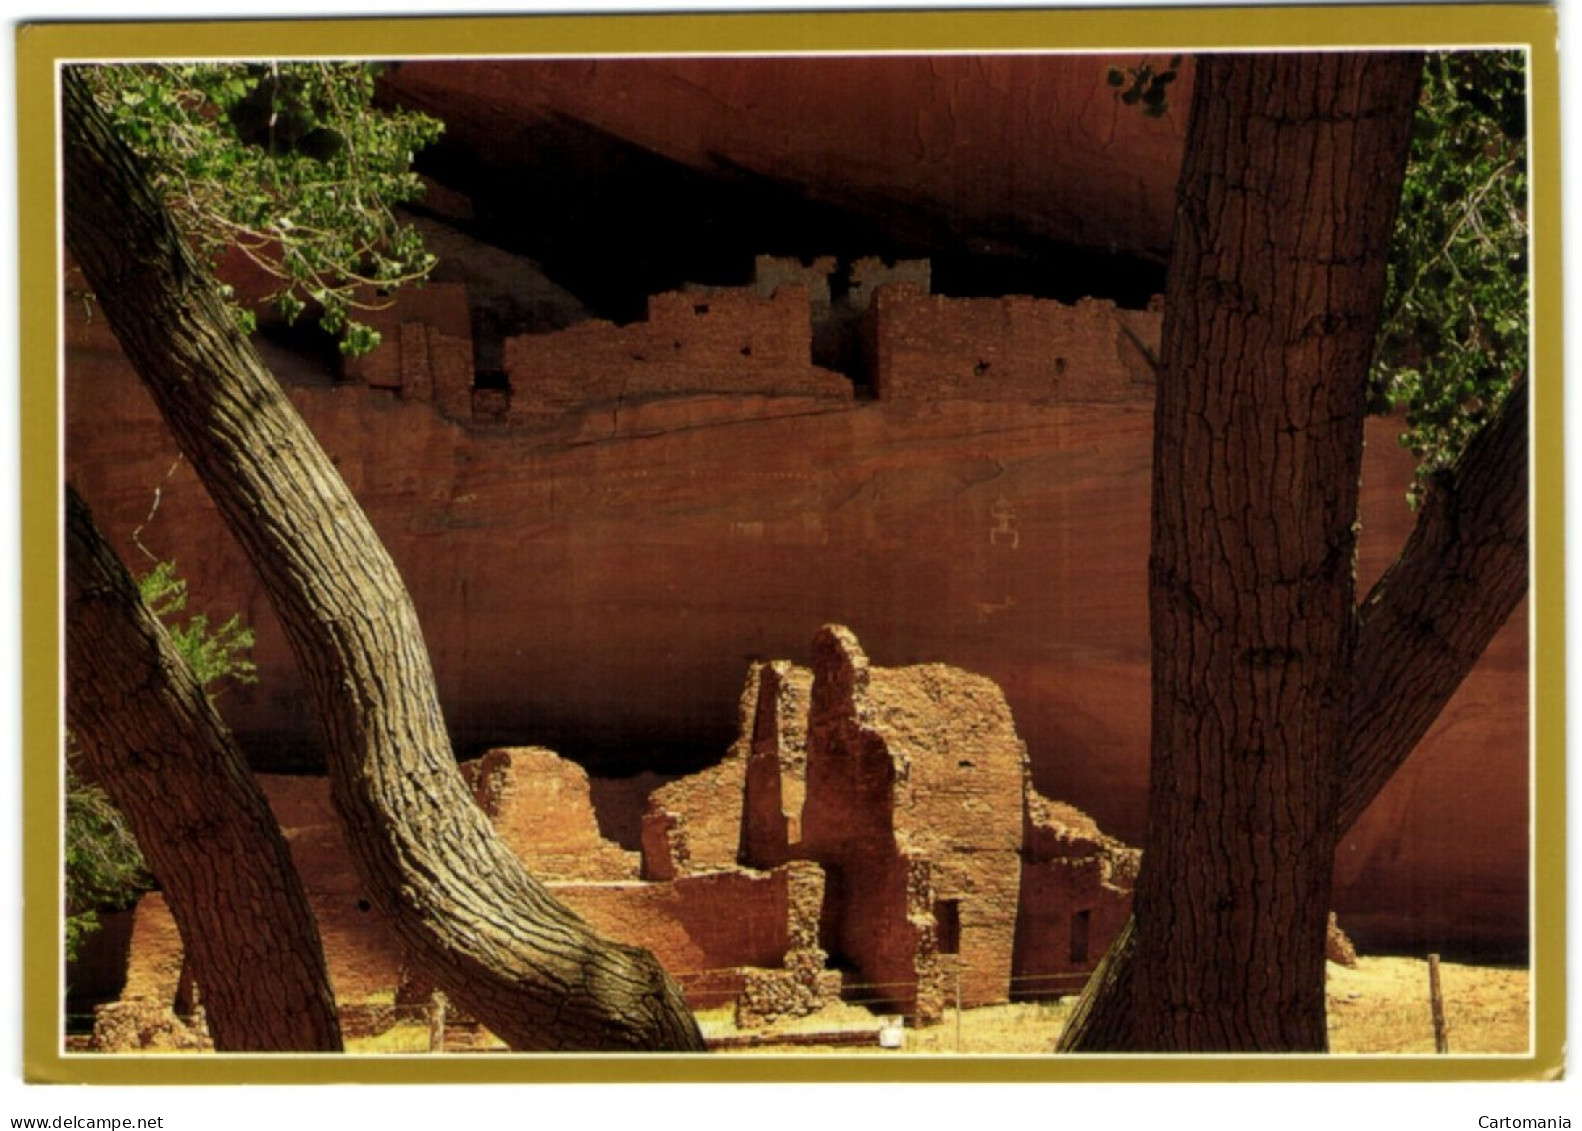 Whitehouse Ruin In Canyon De Chelly National Monument - Arizona - Grand Canyon